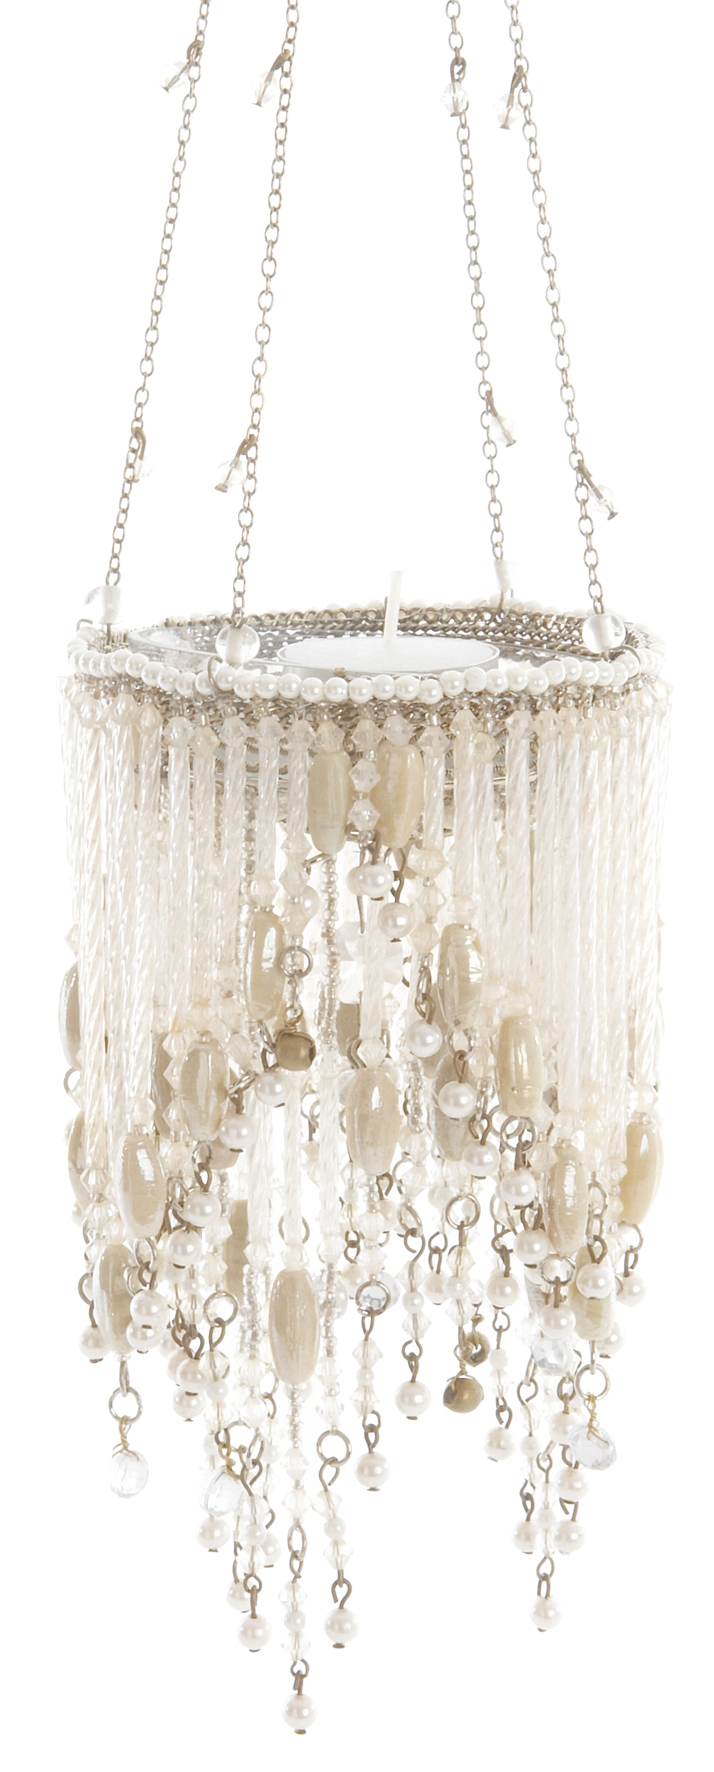 An exquisite, dangling miniature chandelier to hold tea lights and twinkle the night away in sparkly